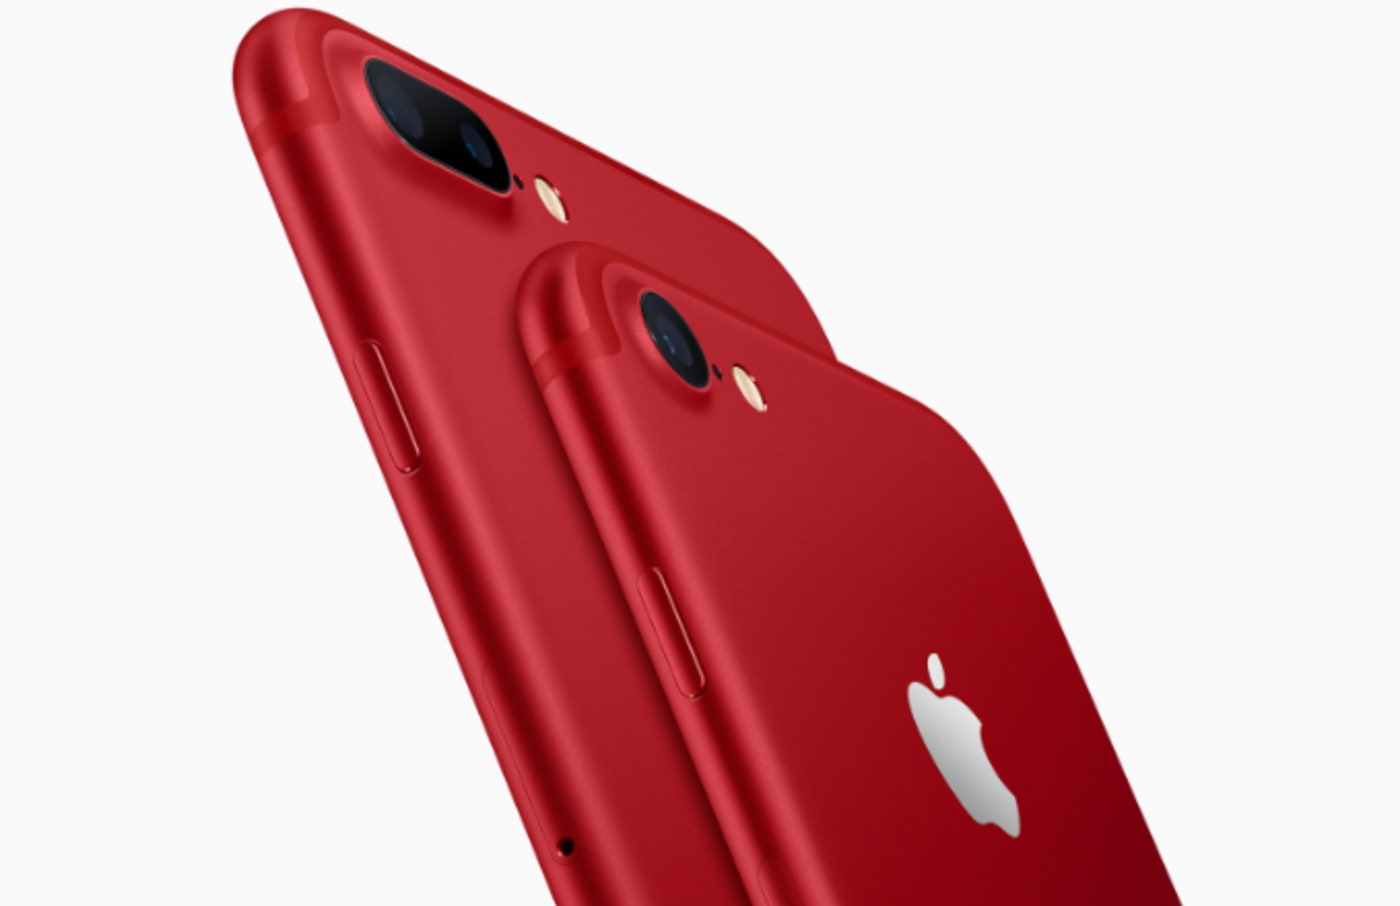 Apple's red iPhone